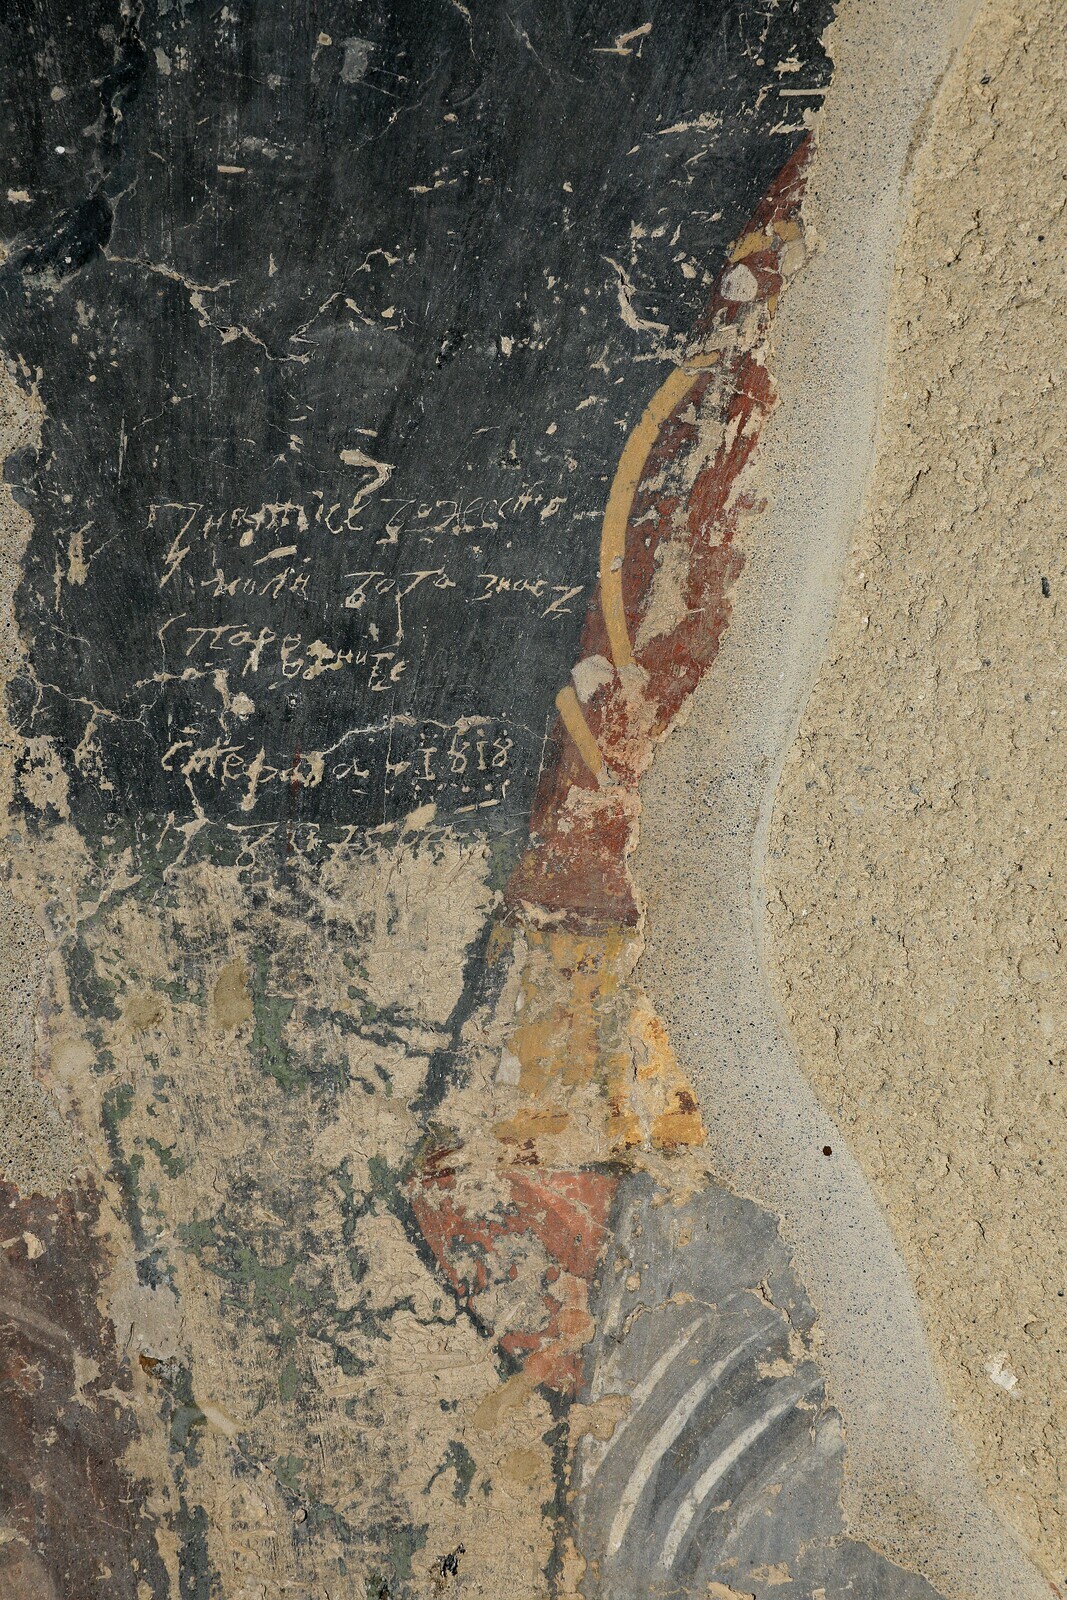 South Section of the Rulers' Composition, detail